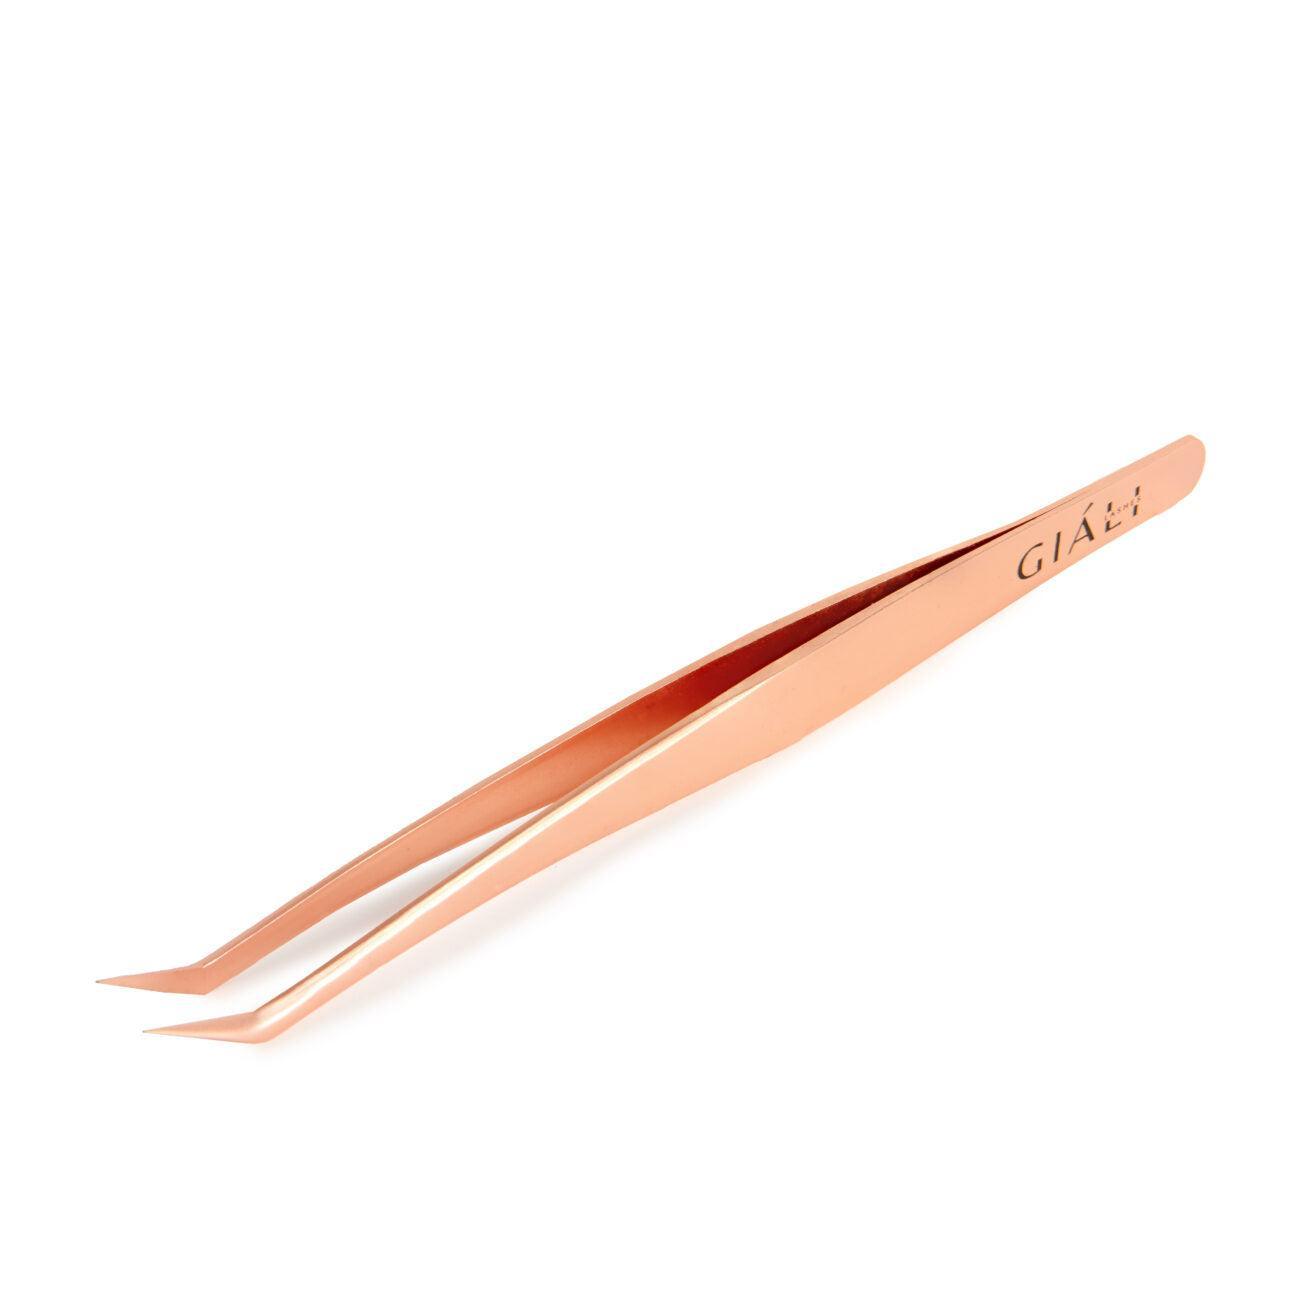 Giáli Lashes Premium Rose Gold Curved Tip Tweezers-Giali Lashes